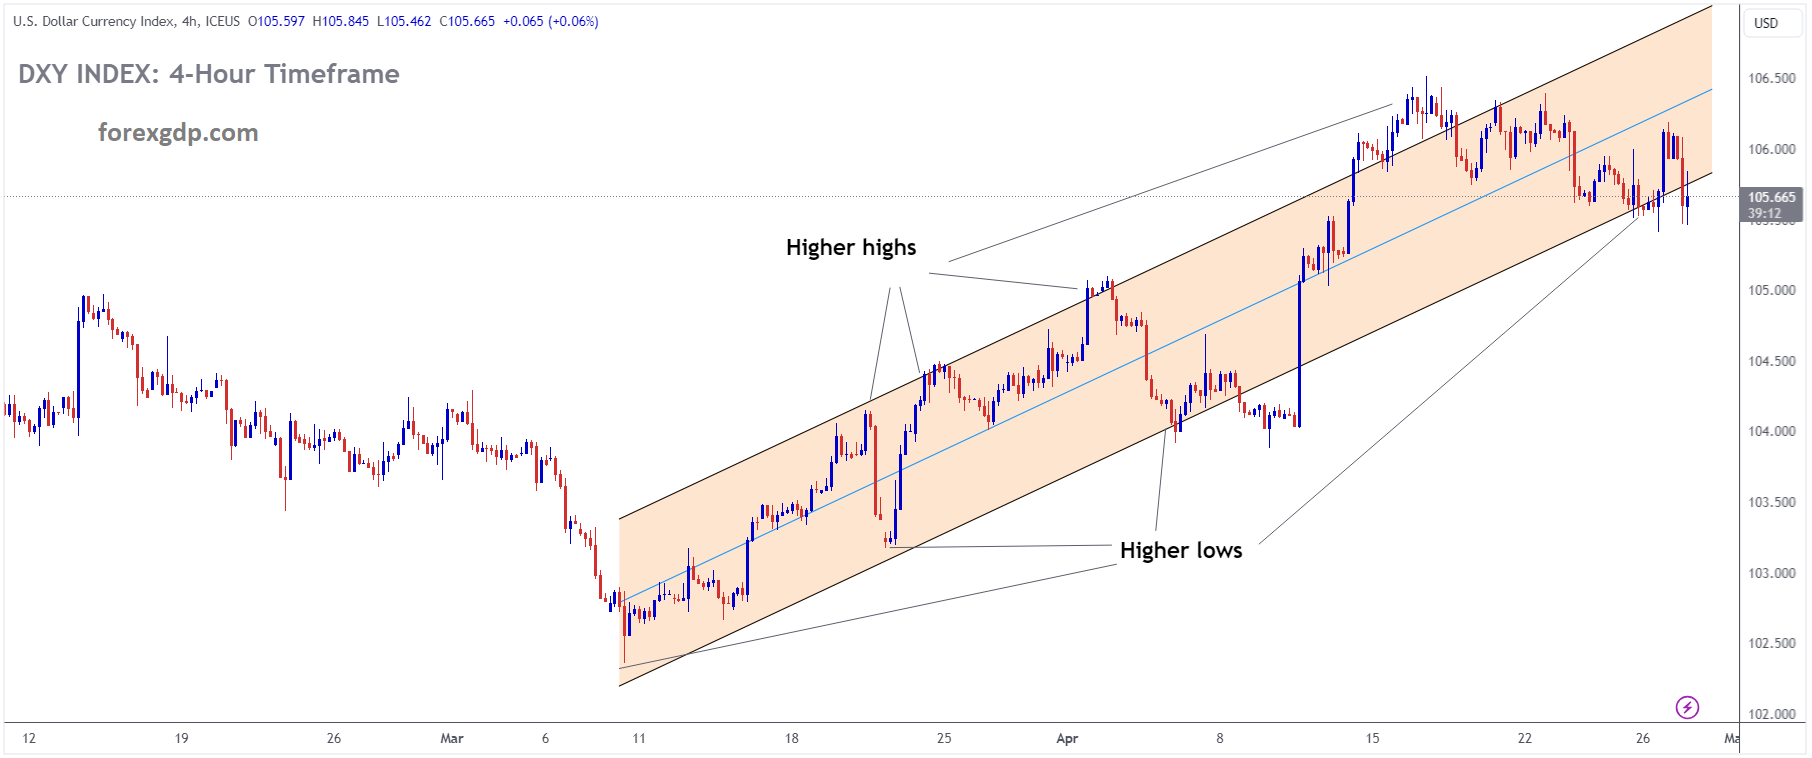 USD Index is moving in an Ascending channel and the market has reached the higher low area of the channel